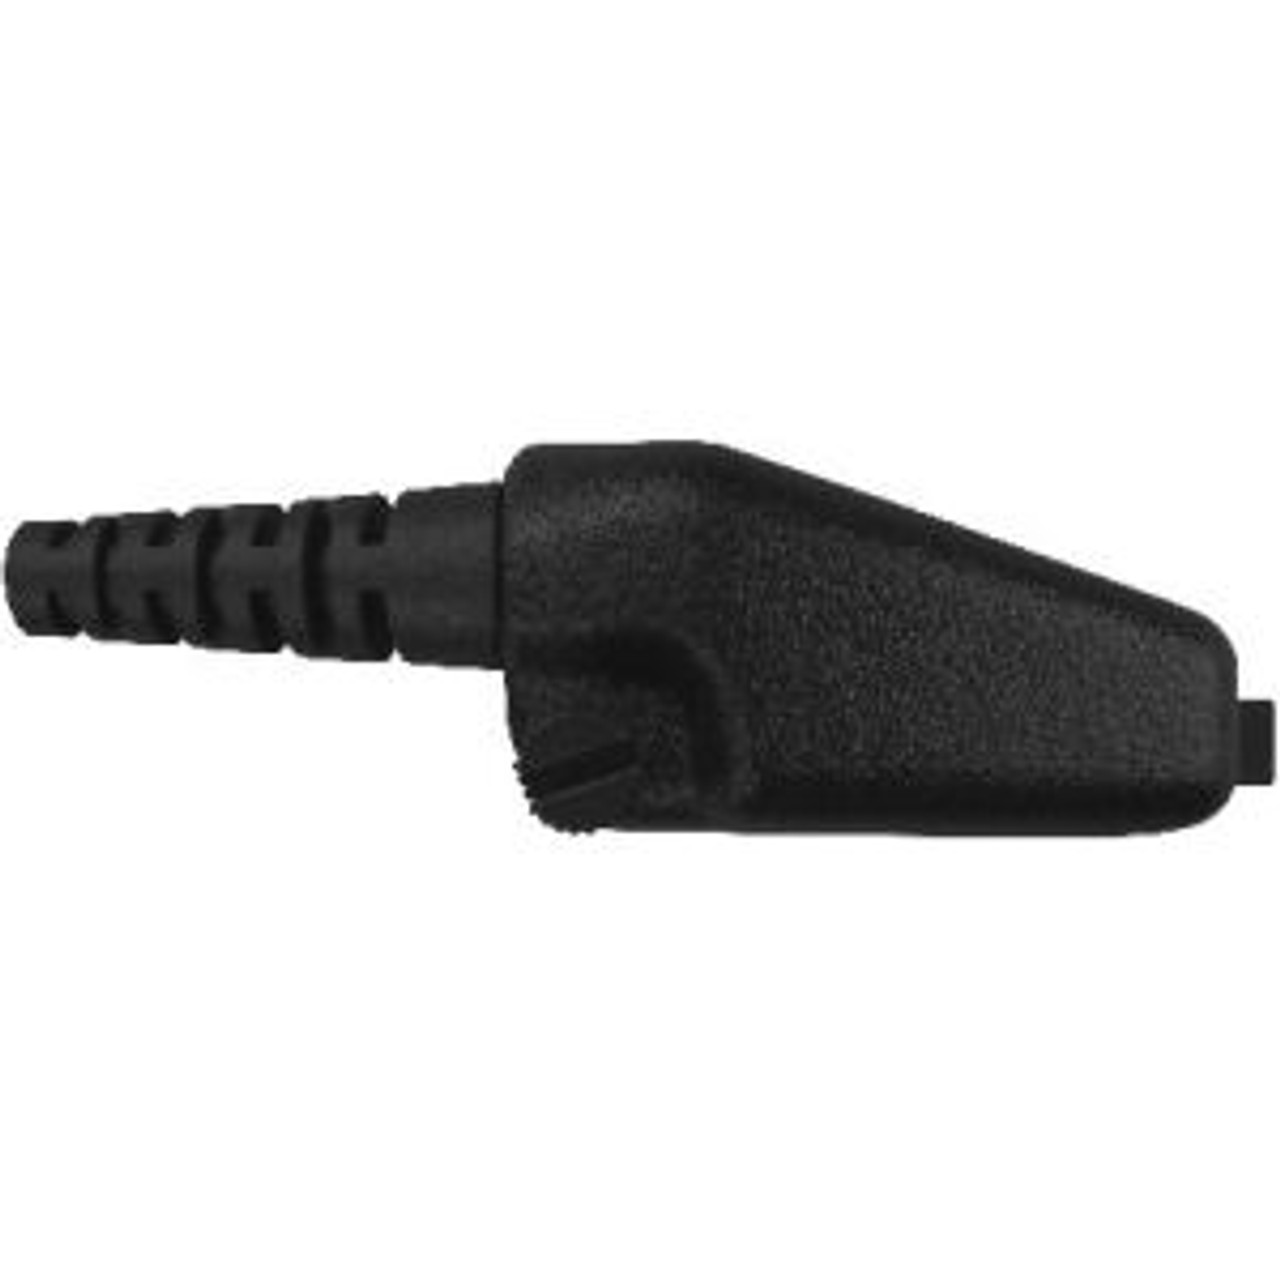 Otto ClearTrak NRX Behind The Head Double Muff Headset For Kenwood TK-290